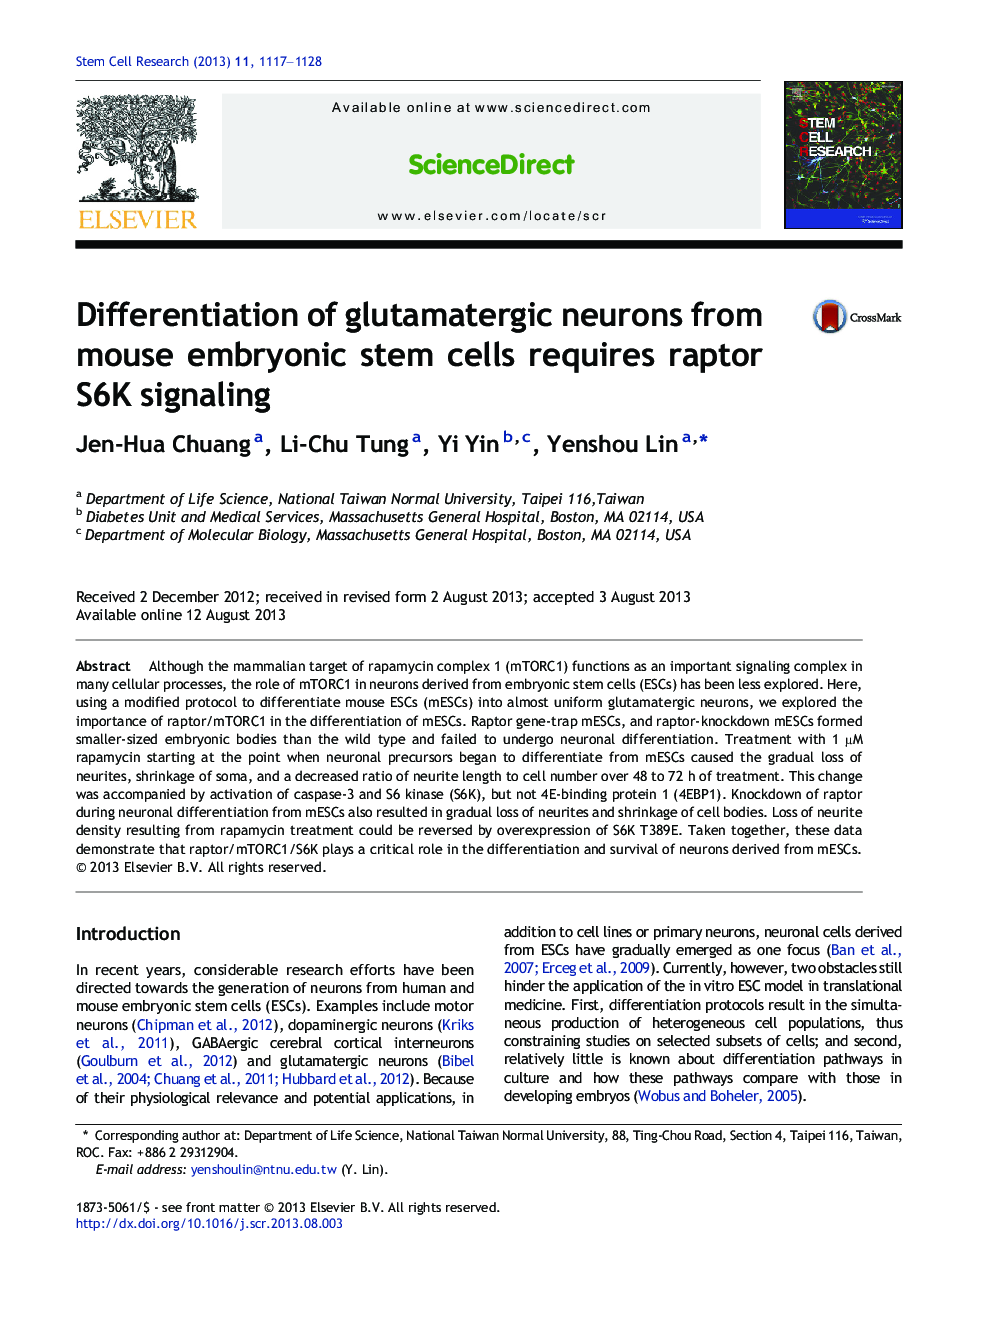 Differentiation of glutamatergic neurons from mouse embryonic stem cells requires raptor S6K signaling